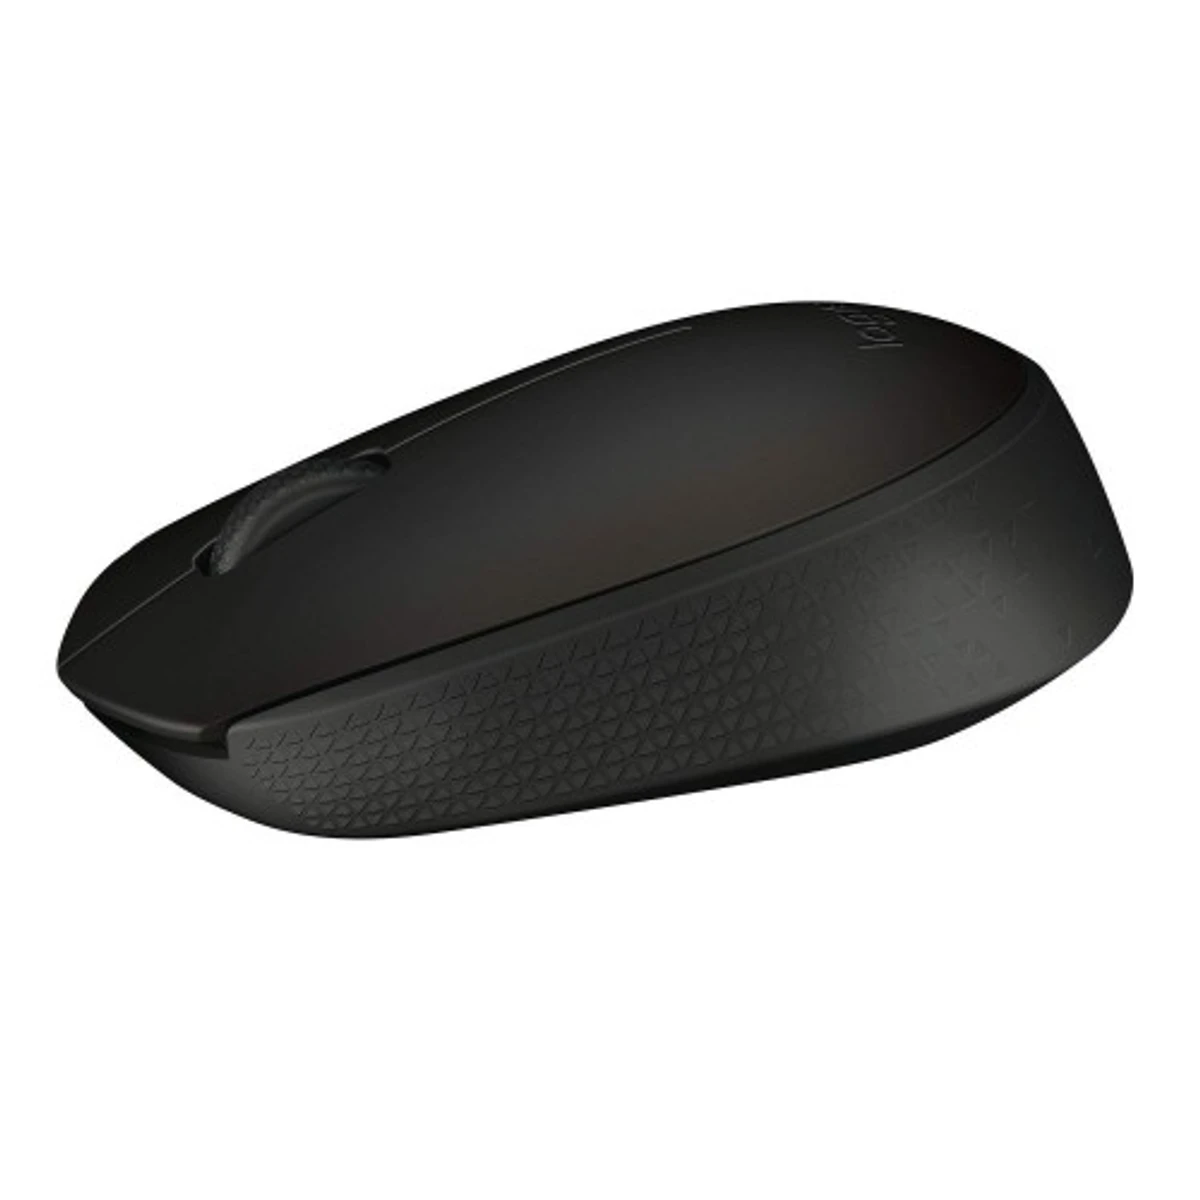 Logitech B170 is an affordable wireless mouse with reliable connectivity,